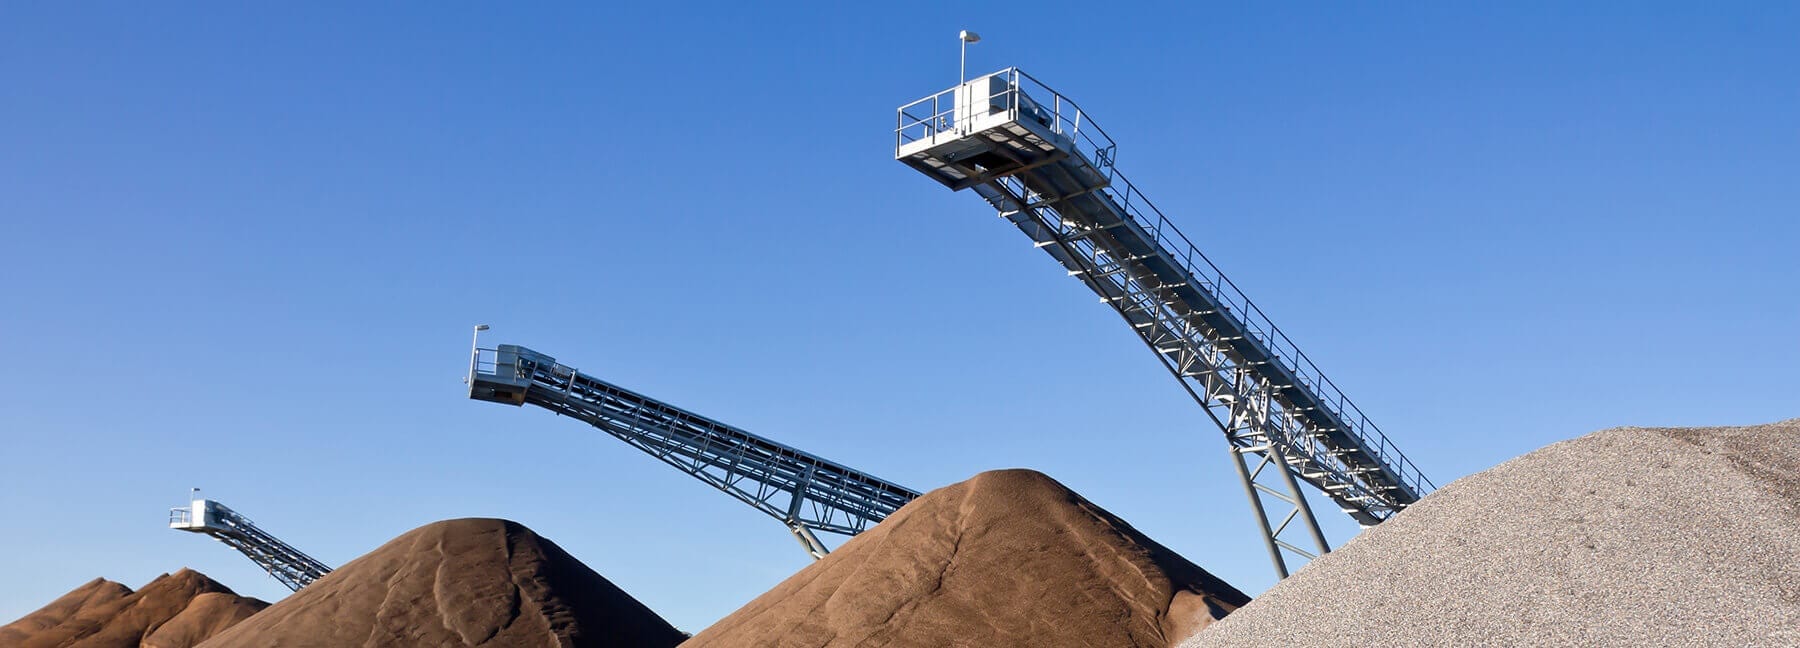 Geneva Rock sells more than just rock. We offer quality sand, gravel and aggregates